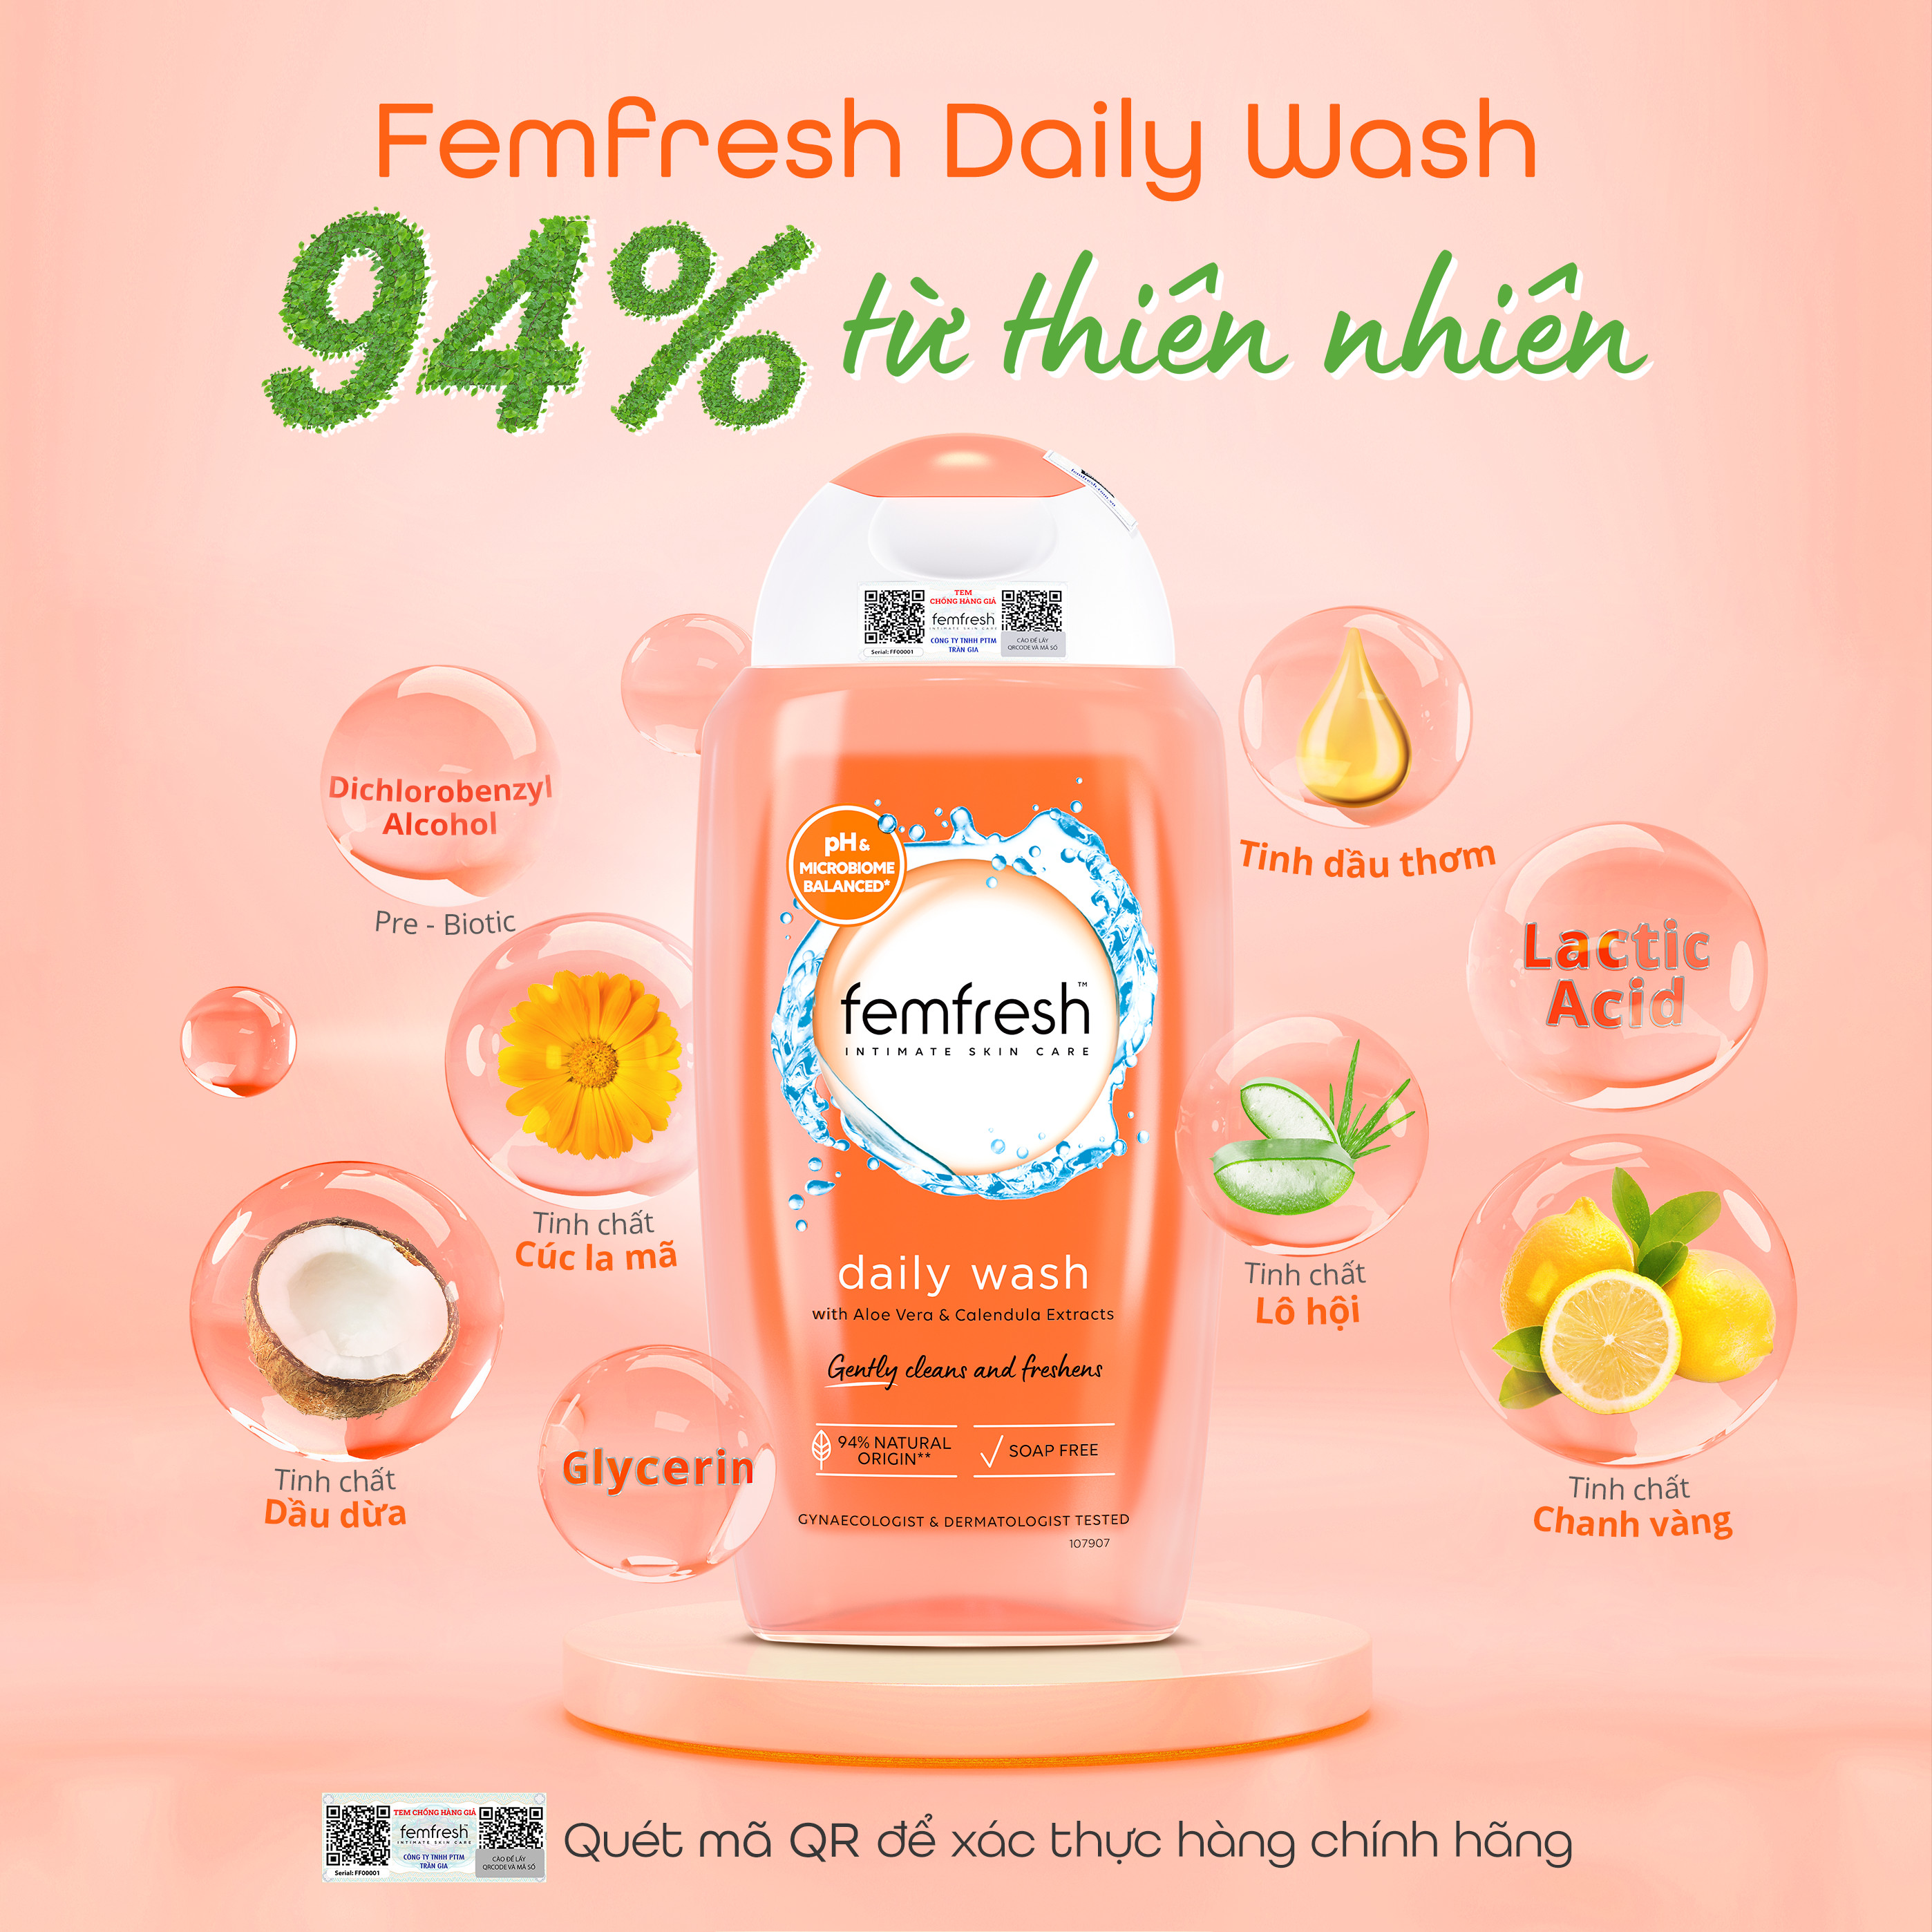 Dung Dịch Vệ Sinh Phụ Nữ Femfresh Daily Intimate Wash 250ml Anh Quốc